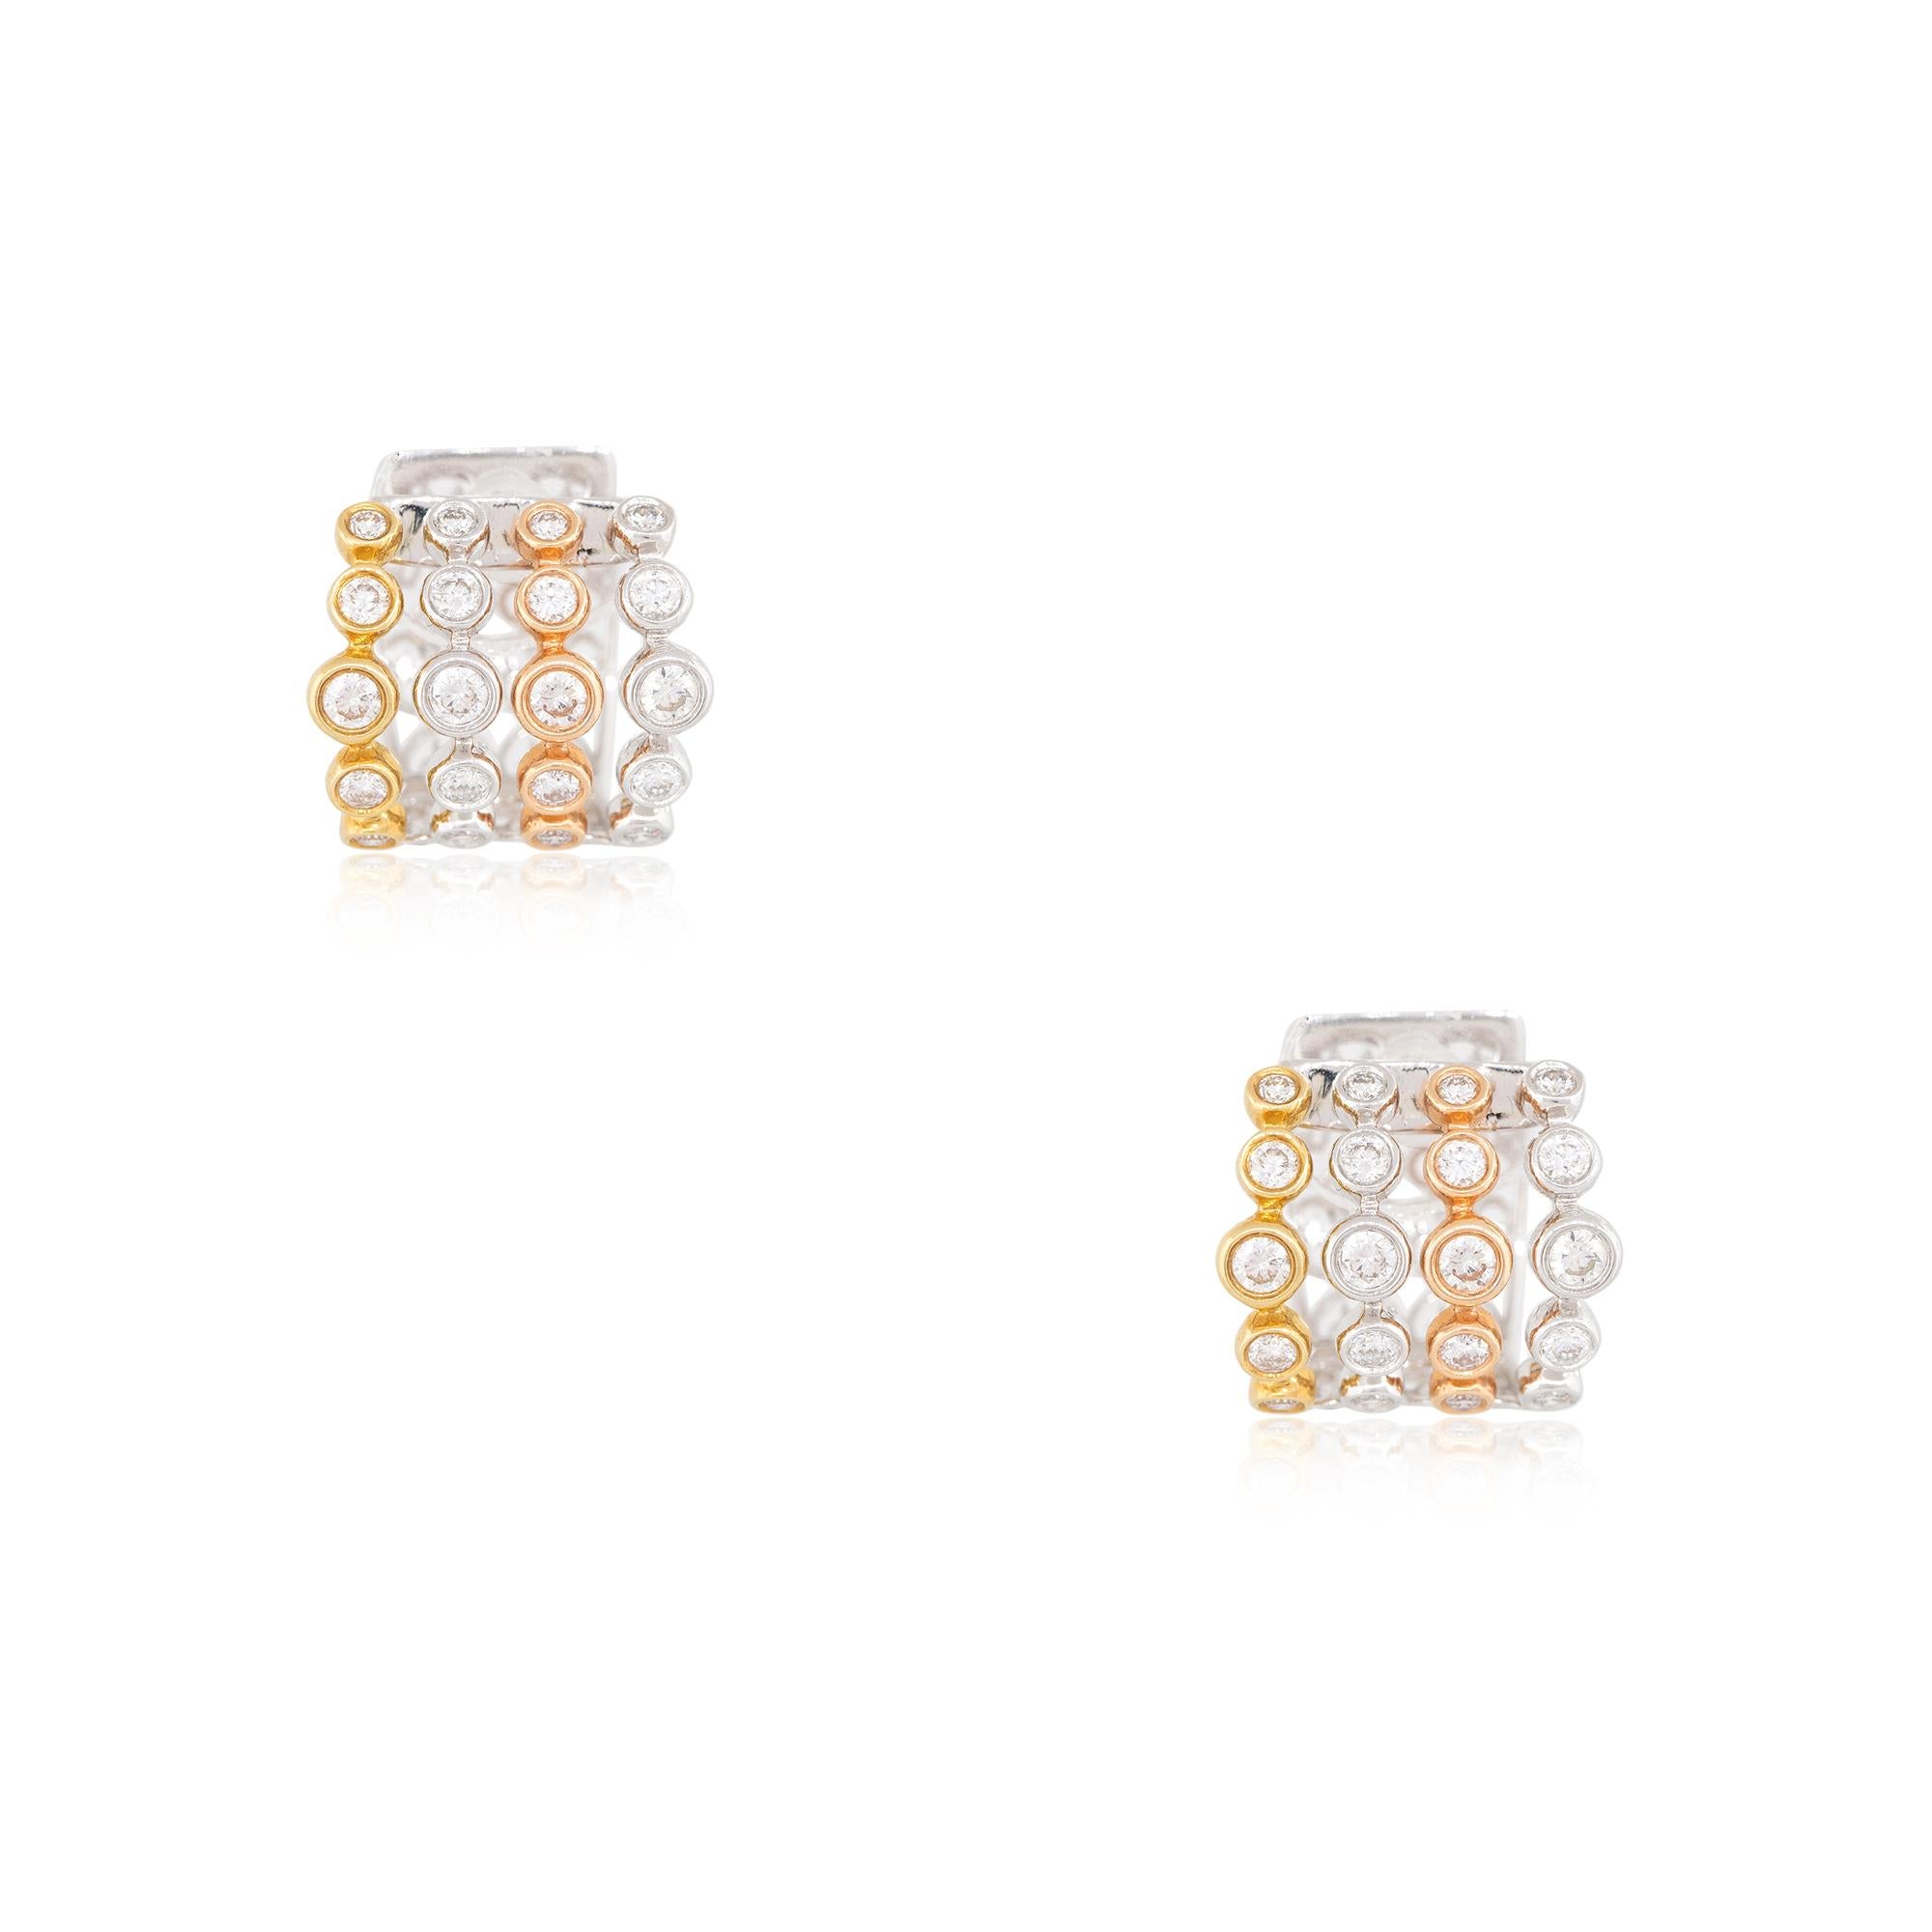 18k Tri-Color Gold 1.98ctw Diamond 5-Row Bezel Set Hoop Earrings

Product: 5-Row Bezel Set Diamond Earrings
Material: 18k White Gold, 18k Rose Gold, 18k Yellow Gold
Diamond Details: There are approximately 1.98 carats of Round Brilliant cut